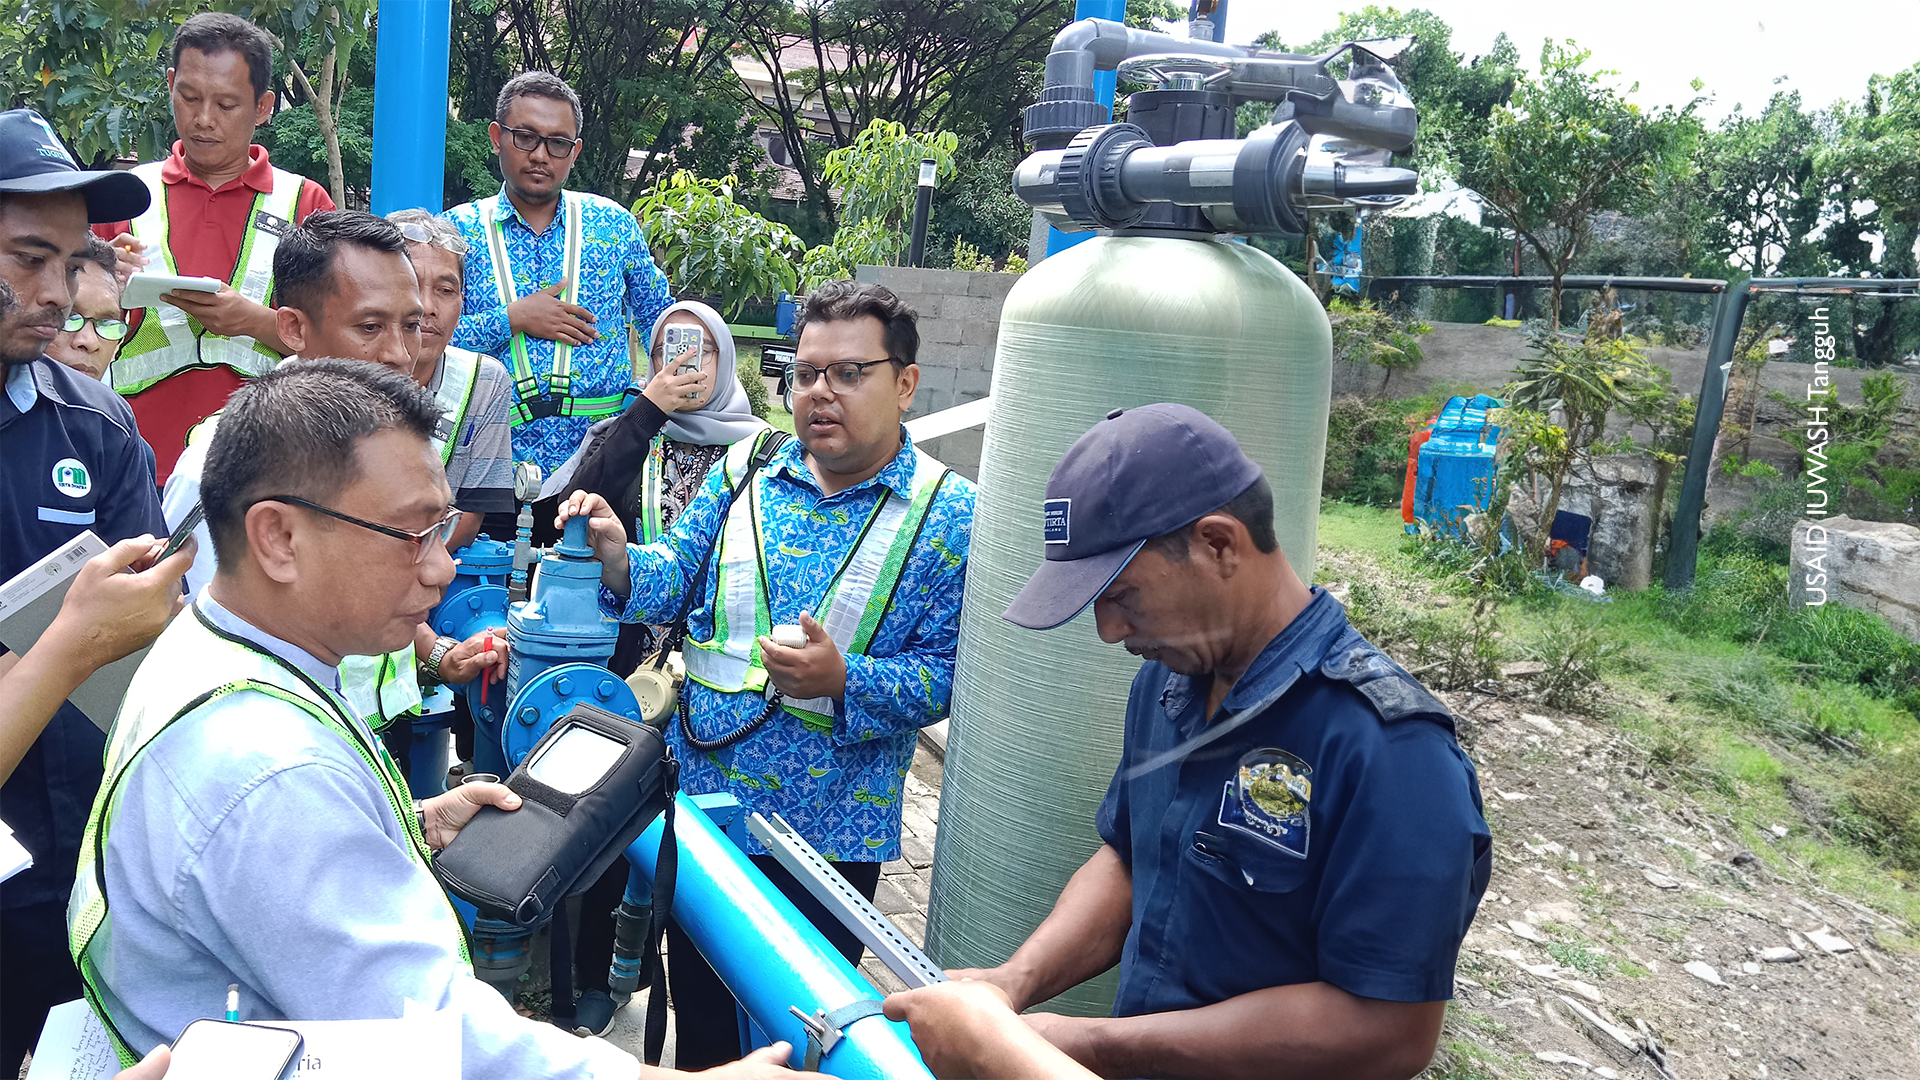 Training participants learn measure water flow in a pumping system